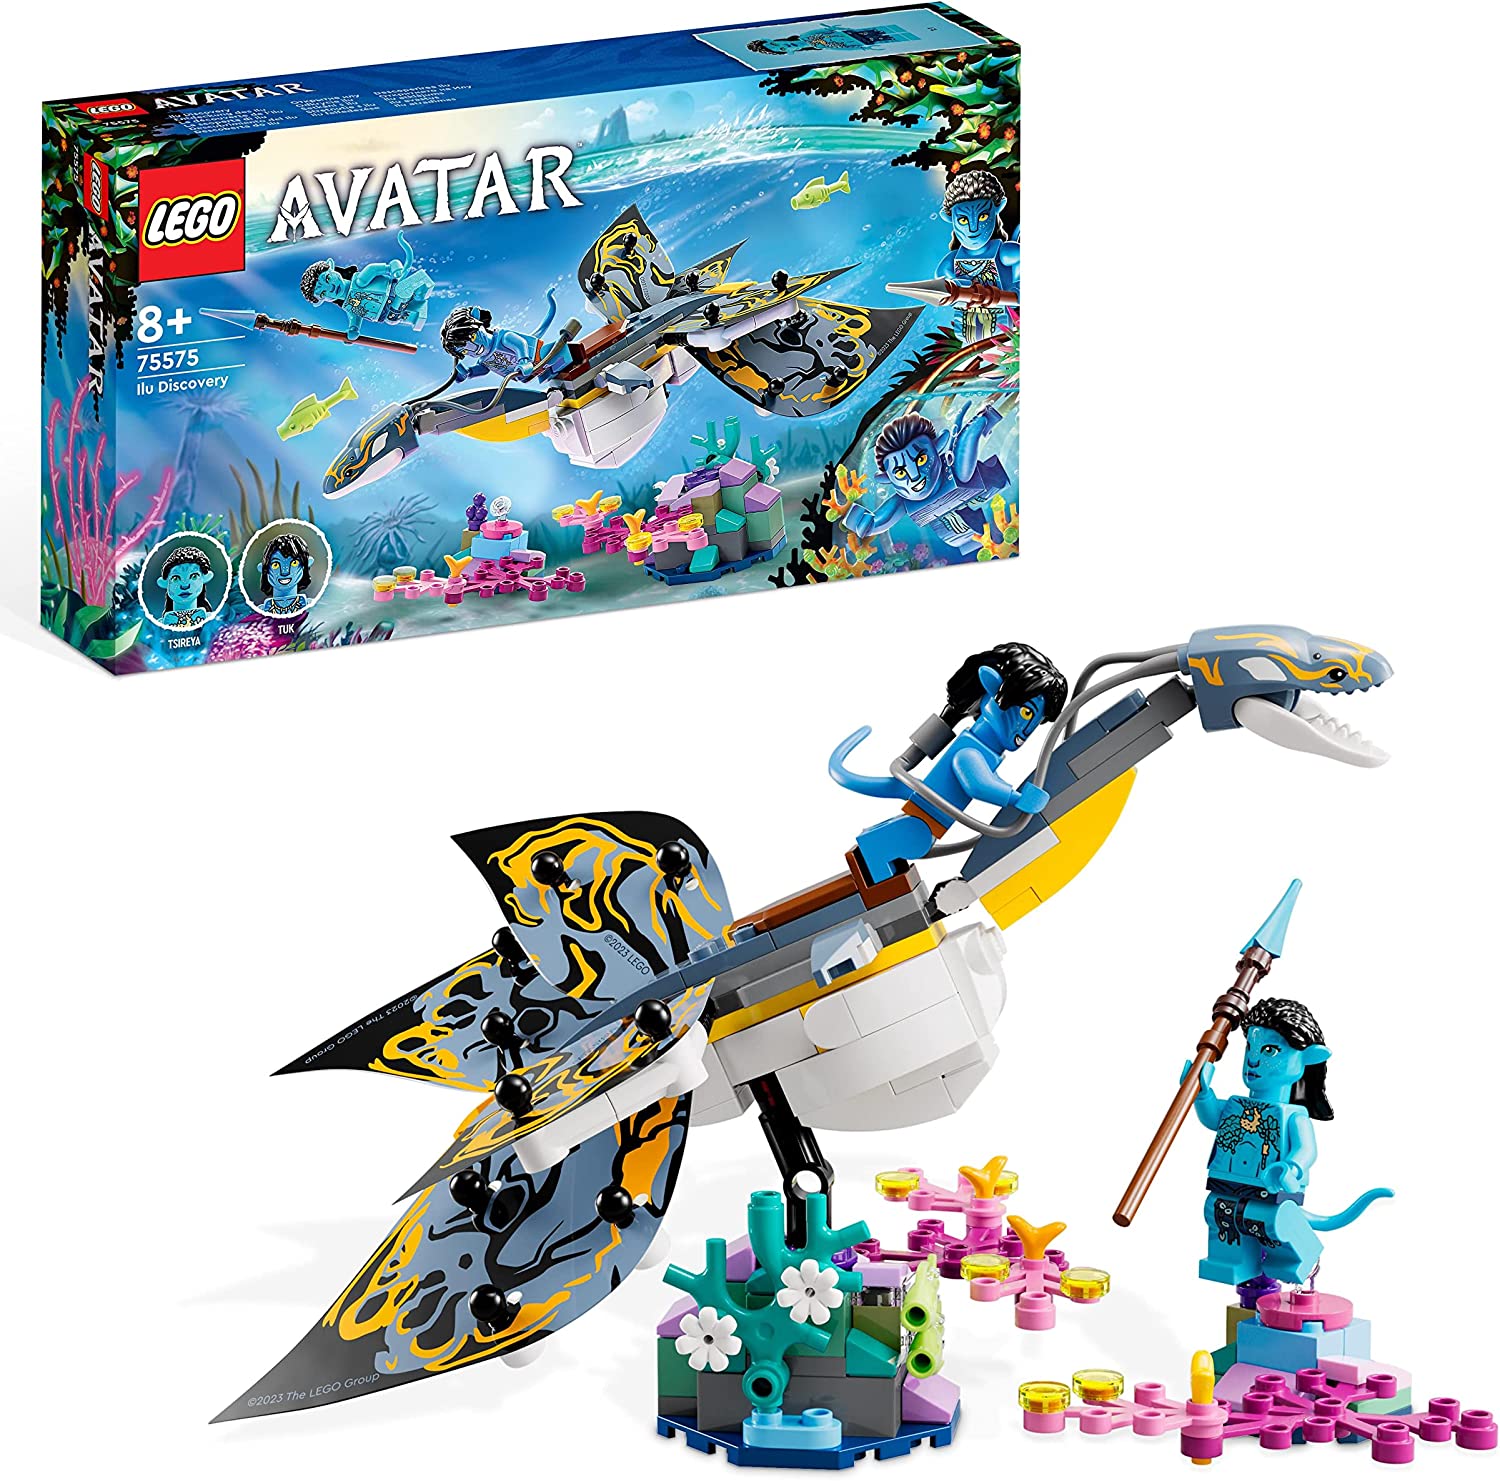 LEGO 75575 Avatar Discover of the Ilu, The Way of Water Buildable Toy with Underwater Figure, Pandora Collection Set for Children and Movie Fans from 8 Years